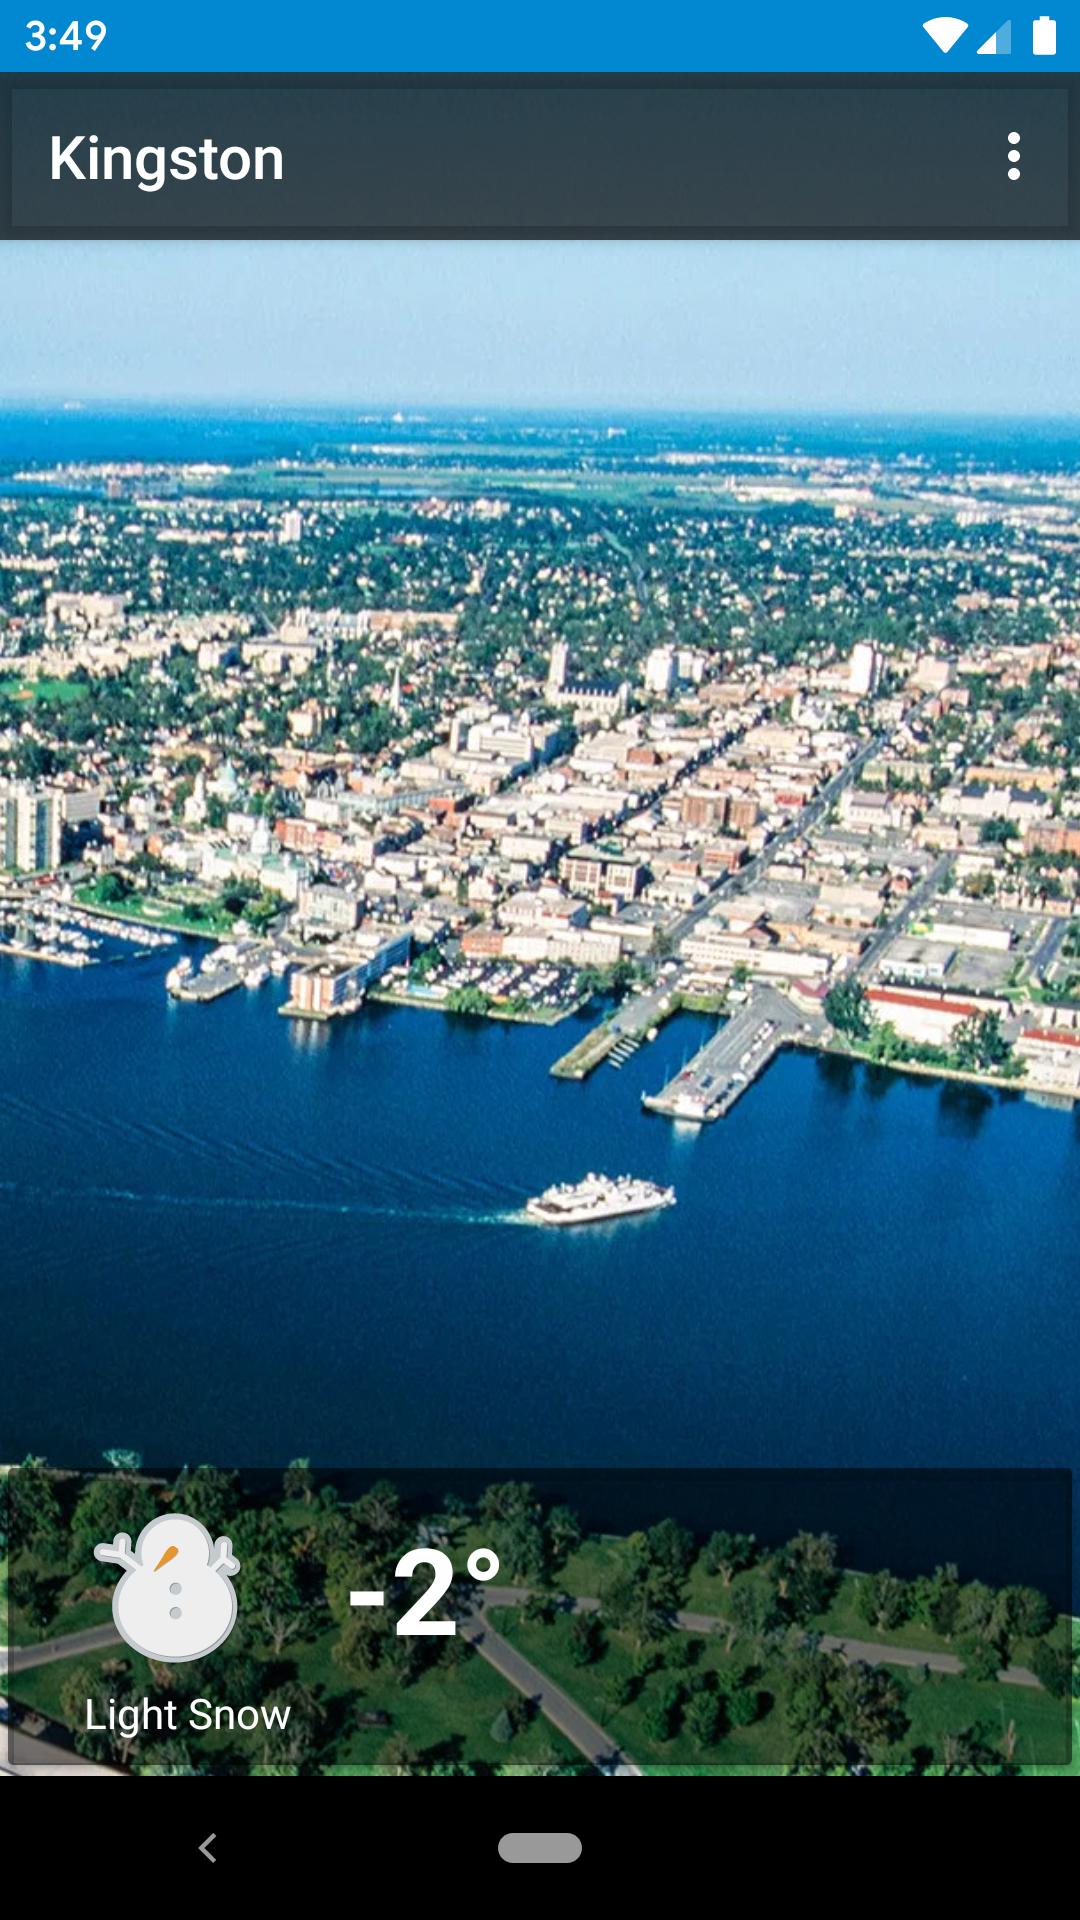 Kingston, Ontario CA - weather and more for Android - APK Download